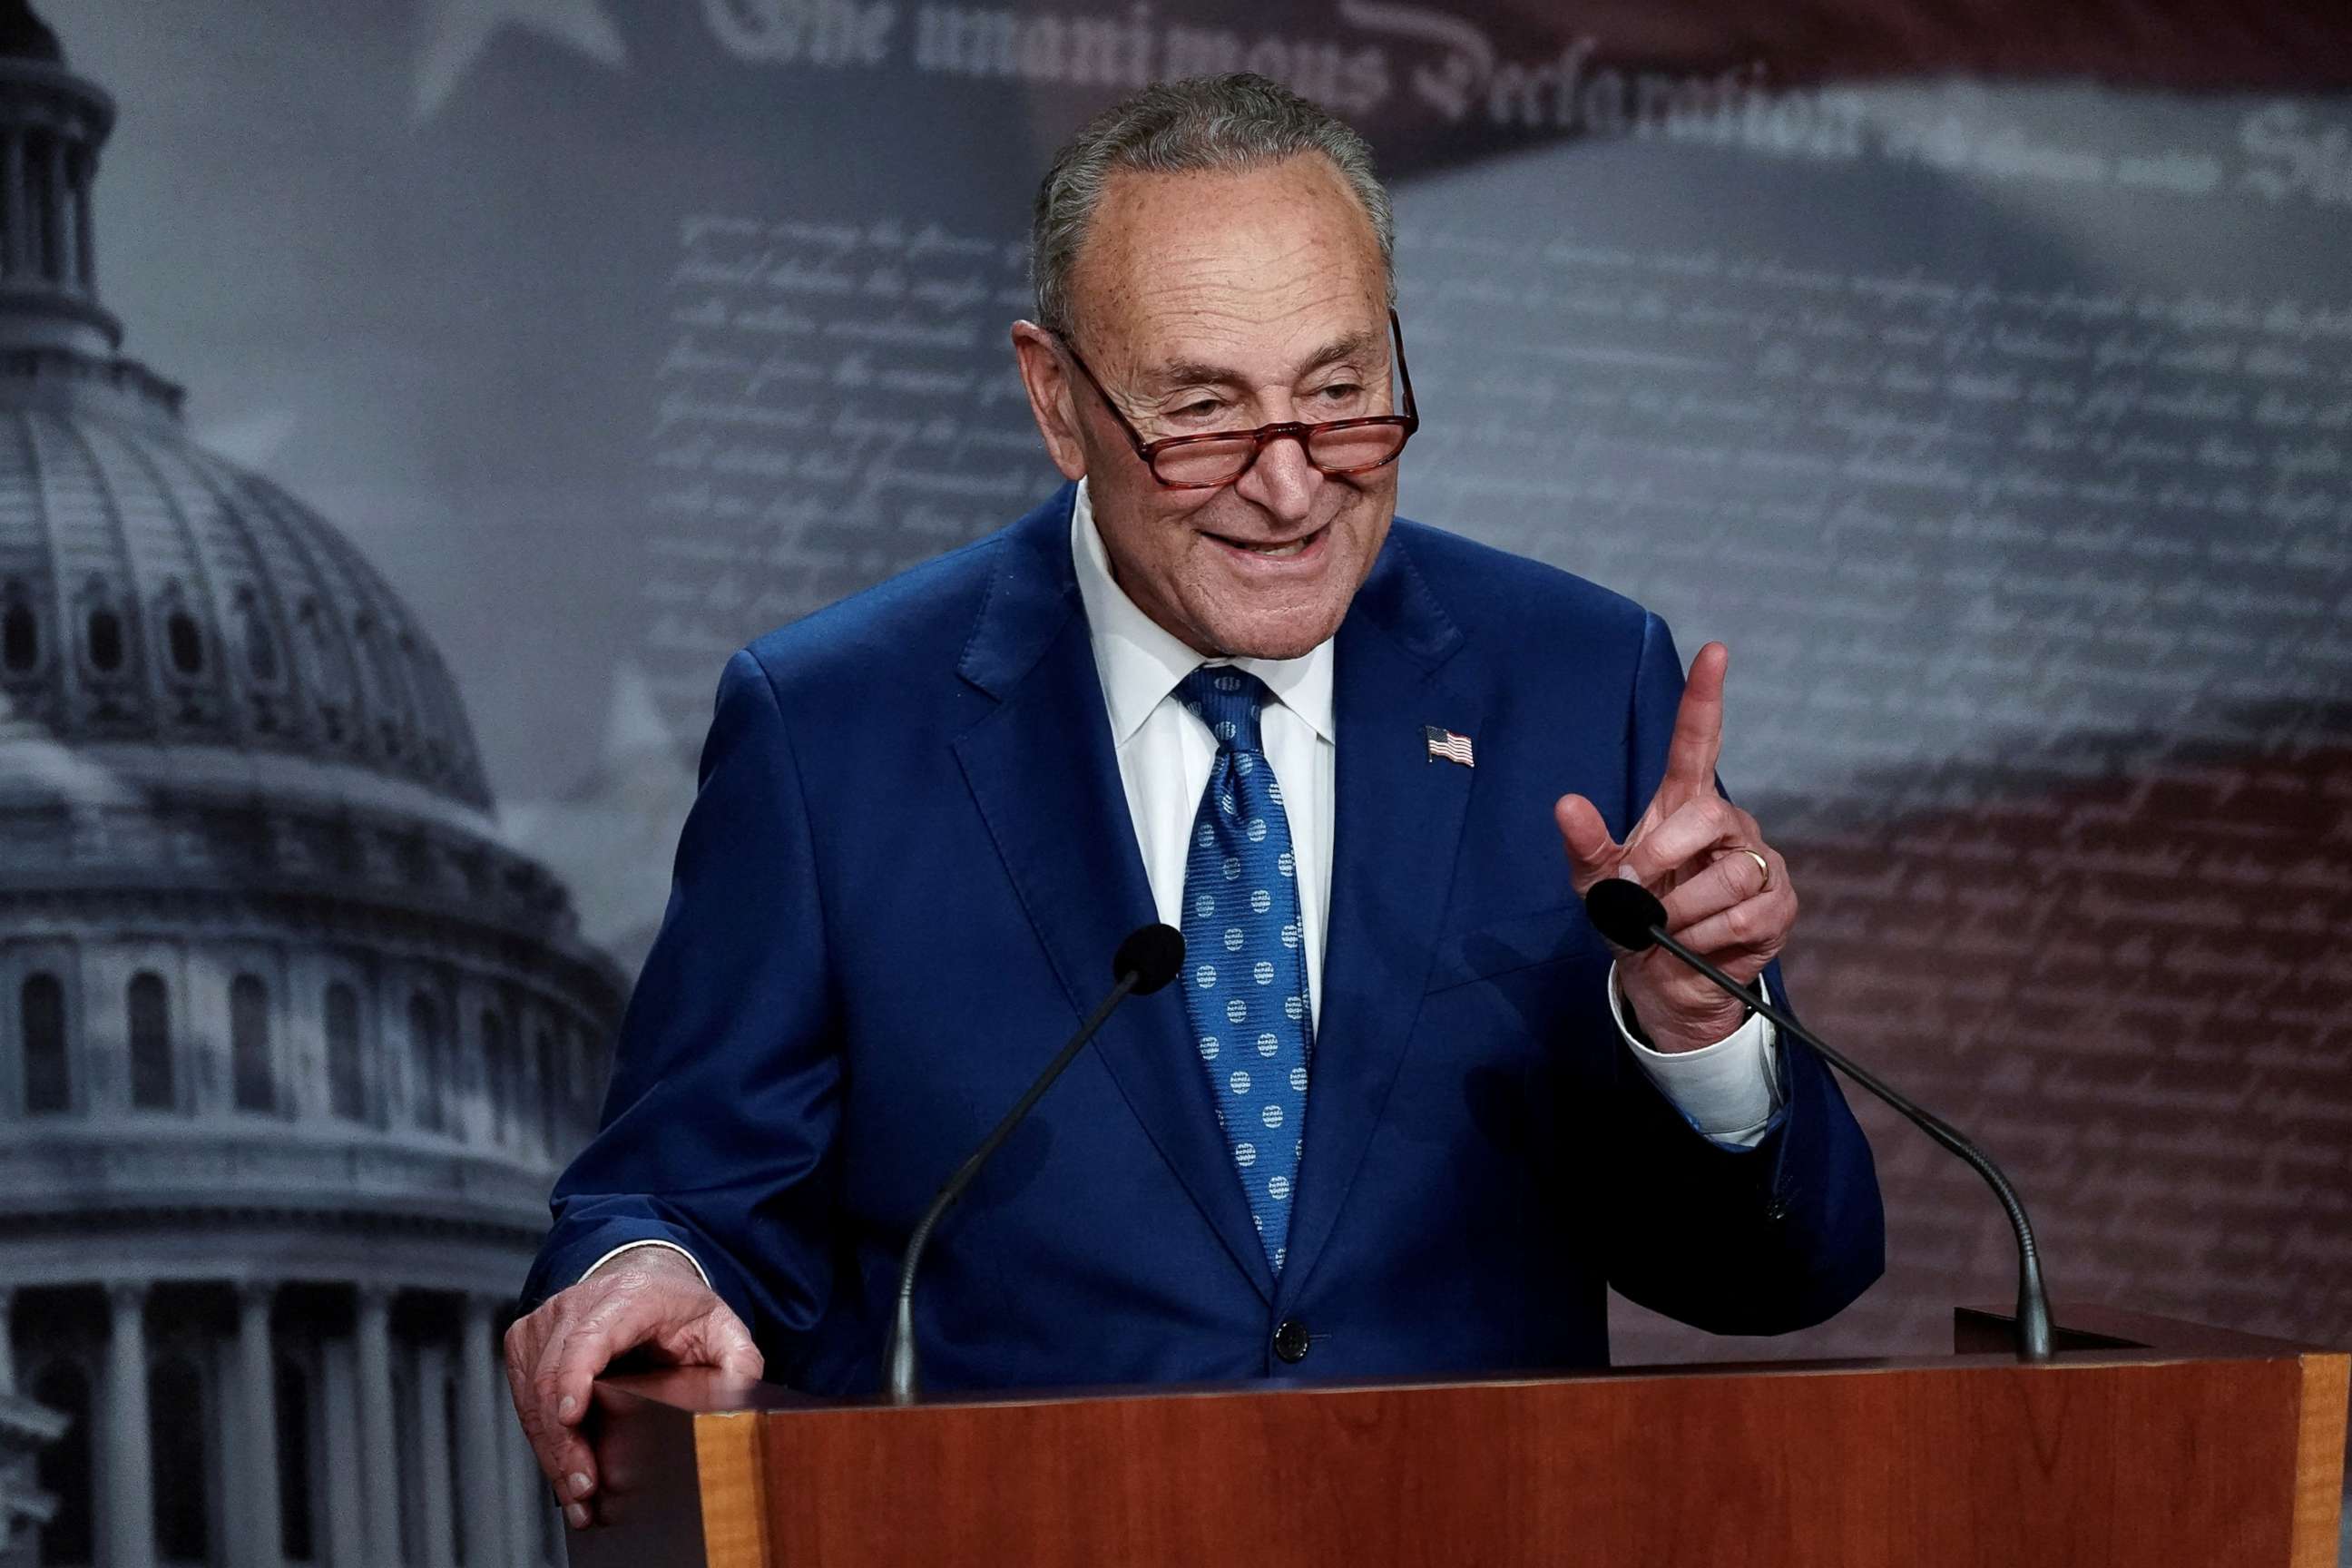 PHOTO: Senate Majority Leader Chuck Schumer speaks to the media following the 51-50 vote passing of the "Inflation Reduction Act of 2022" on Capitol Hill in Washington, D.C., Aug. 7, 2022.